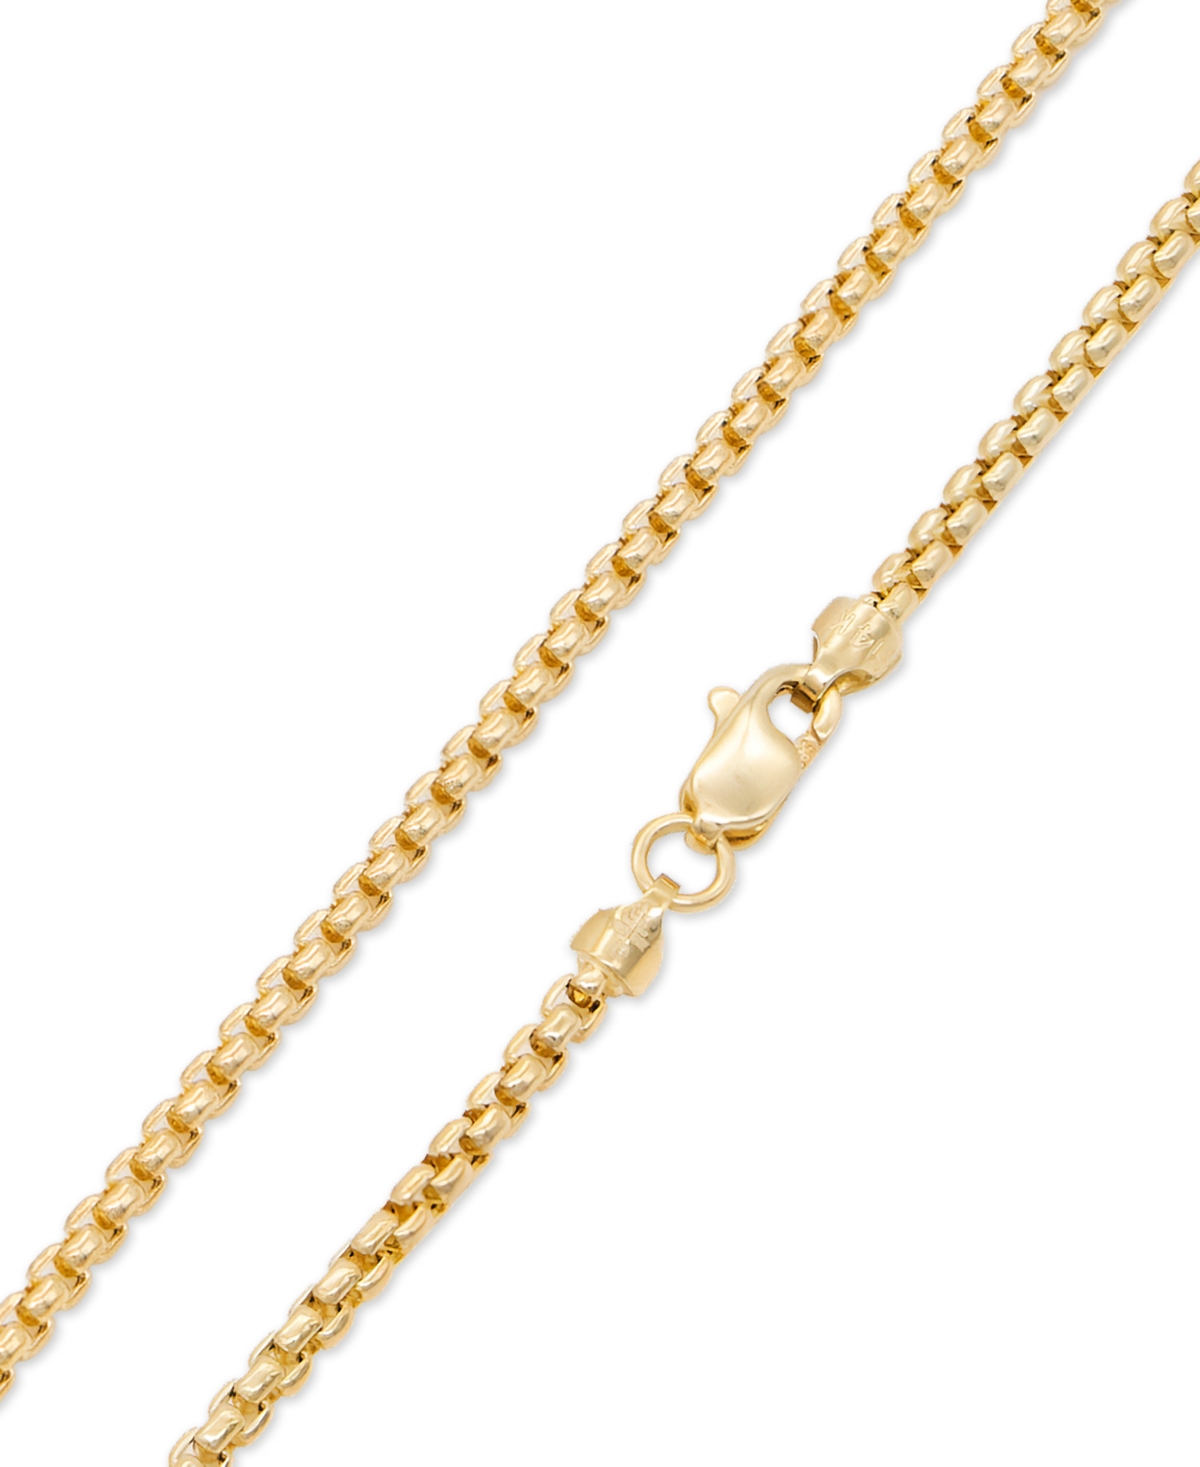 14K Gold Box Round 2mm Chain Bracelet, 8.5", approx. 2.1grams - Gold